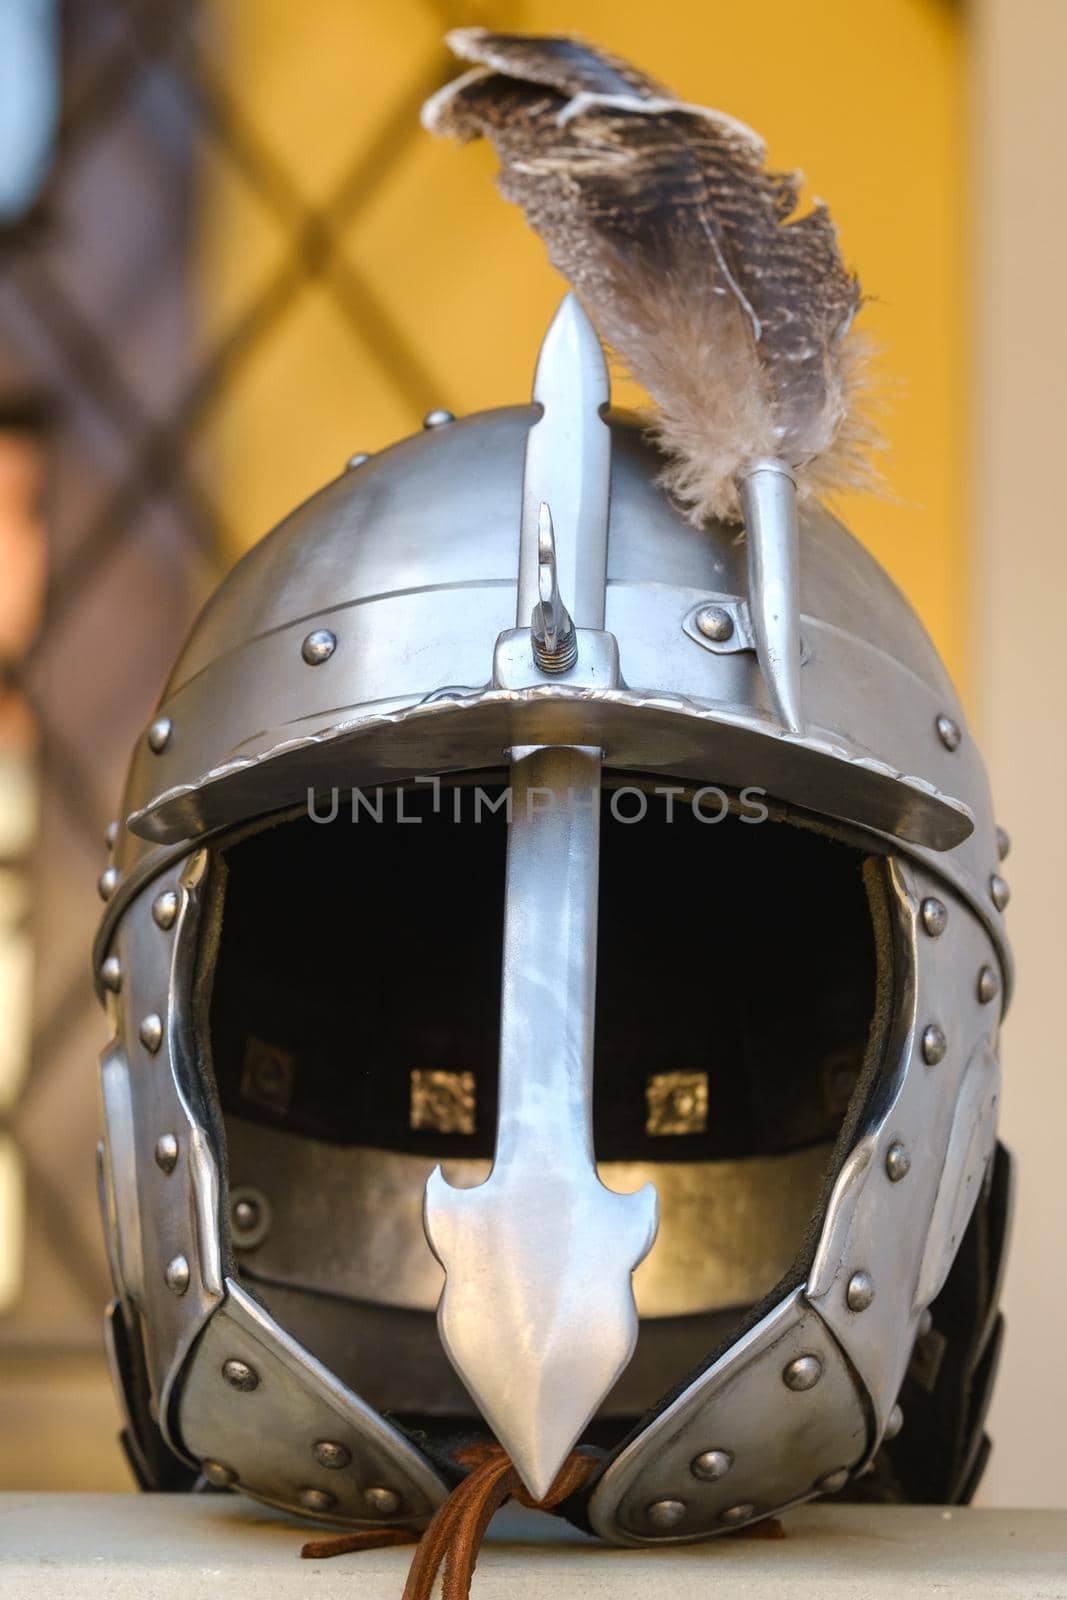 An ancient knight's helmet with a feather .Medieval concept.